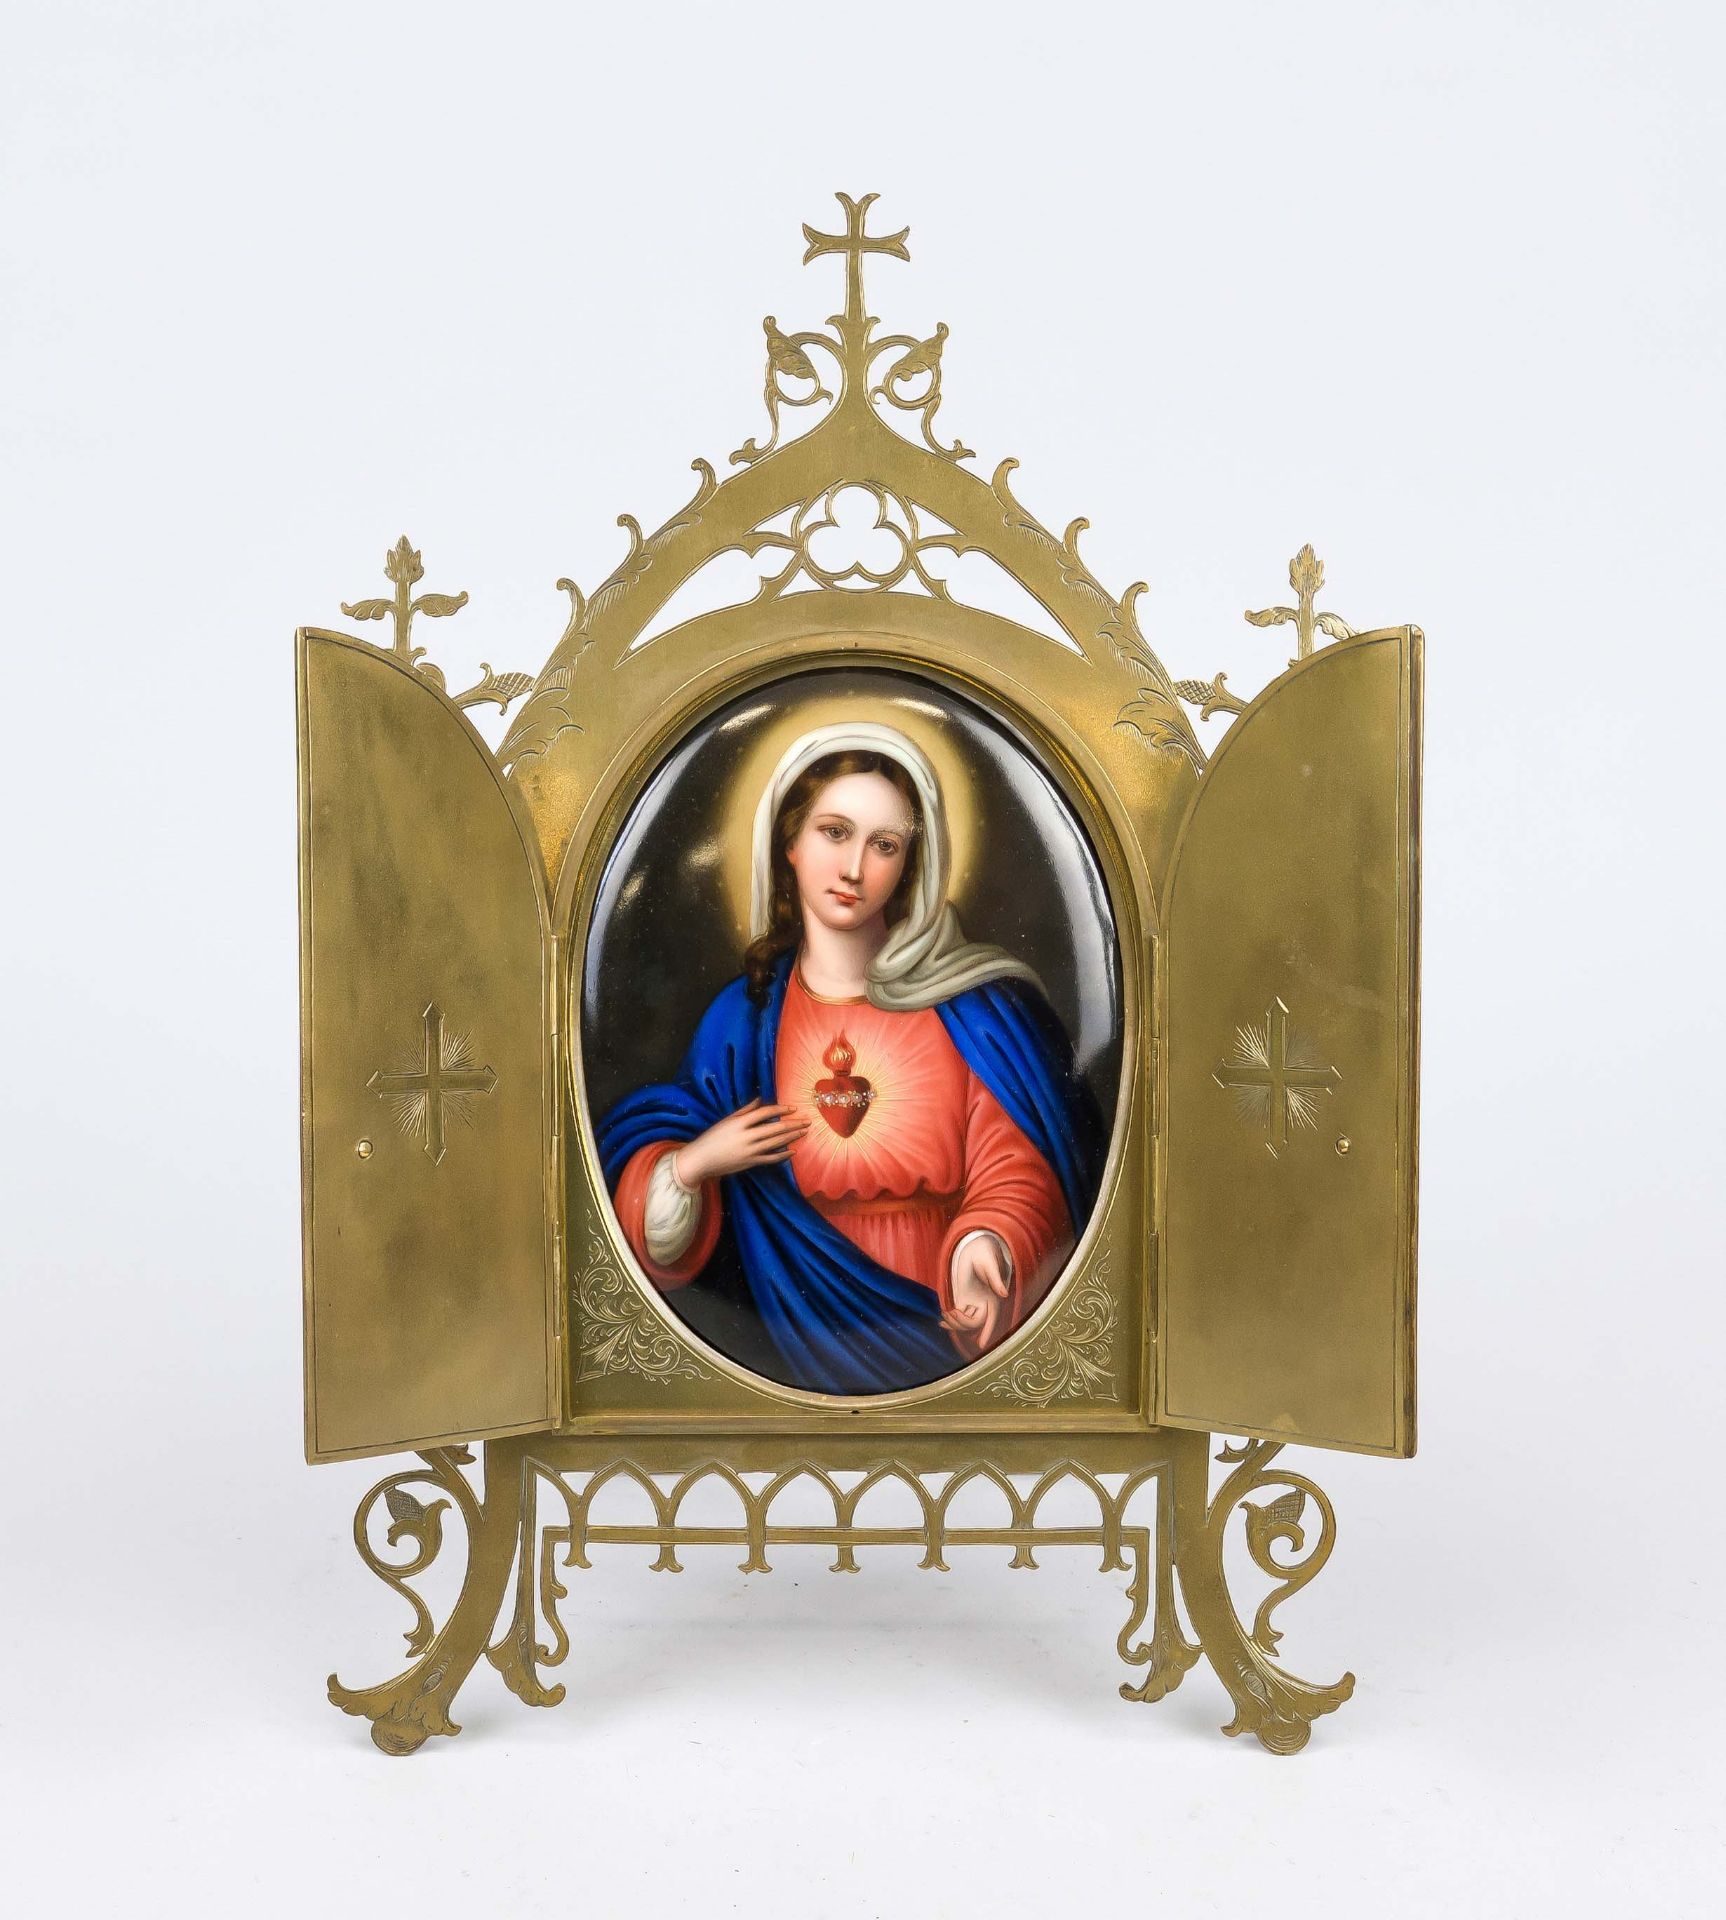 House altar with Madonna painting, 19th century, brass/bronze and porcelain painting. Neo-Gothic